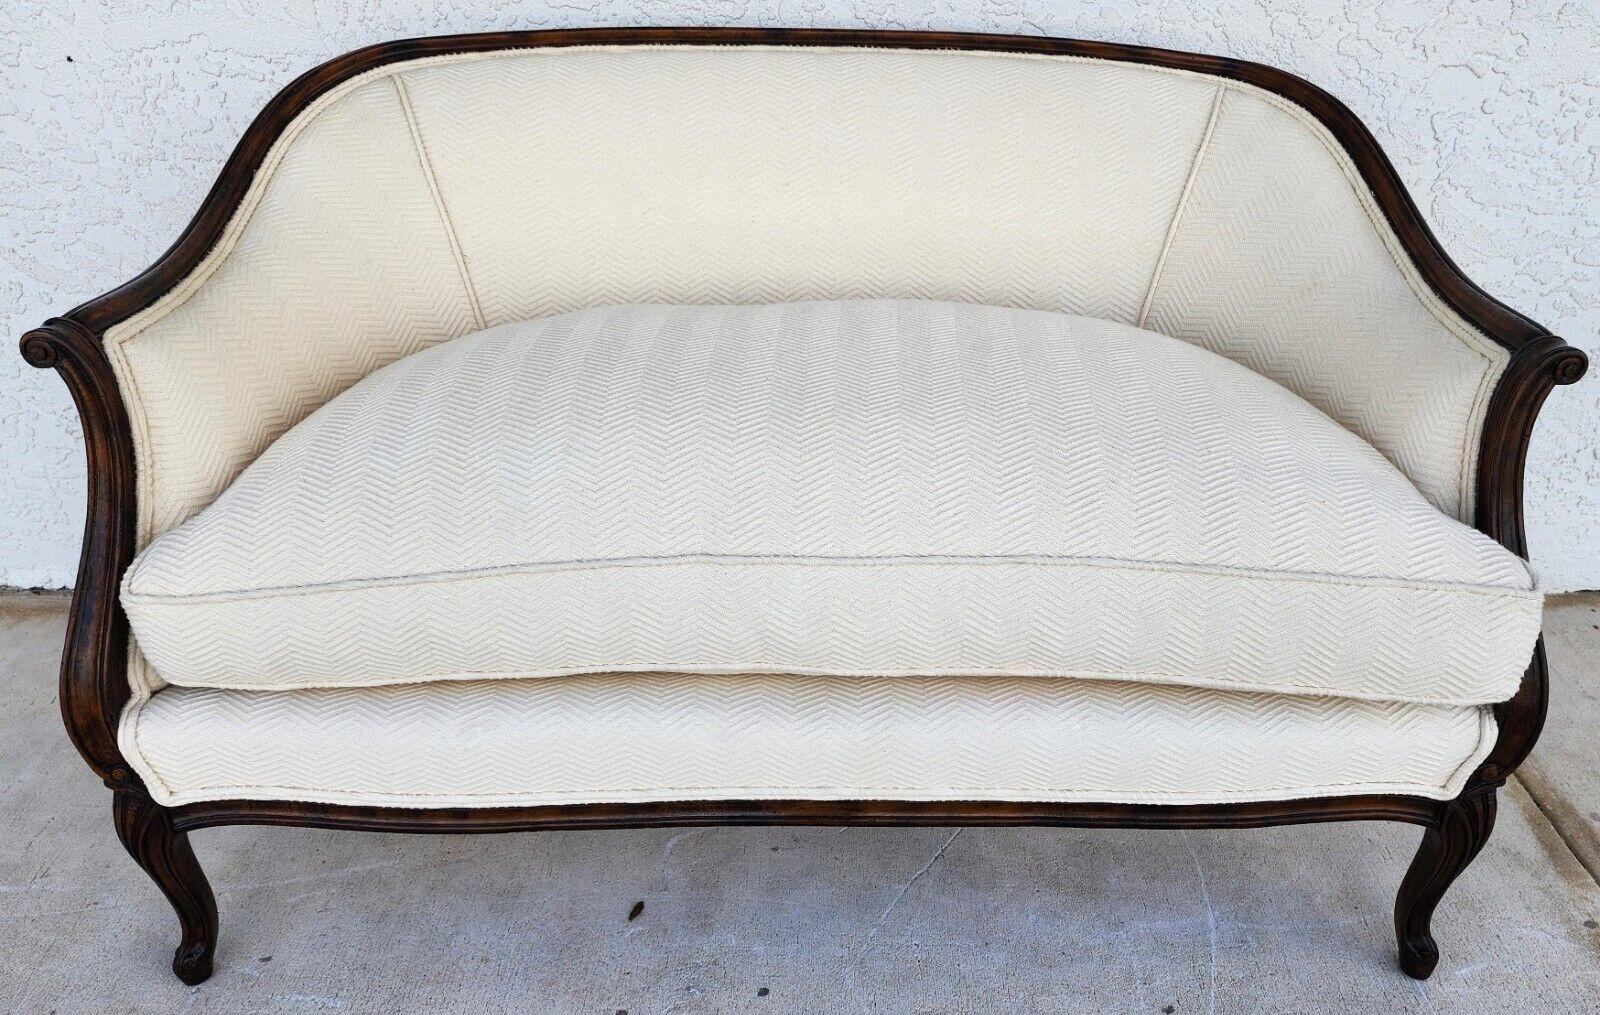 Offering one of our recent Palm Beach estate fine furniture acquisitions of a
French Louis XV Style settee sofa by Meyer Gunther Martini
With 100% heavy cotton chevron patterned upholstery and all down/feather cushion made by Atlantic Feather &